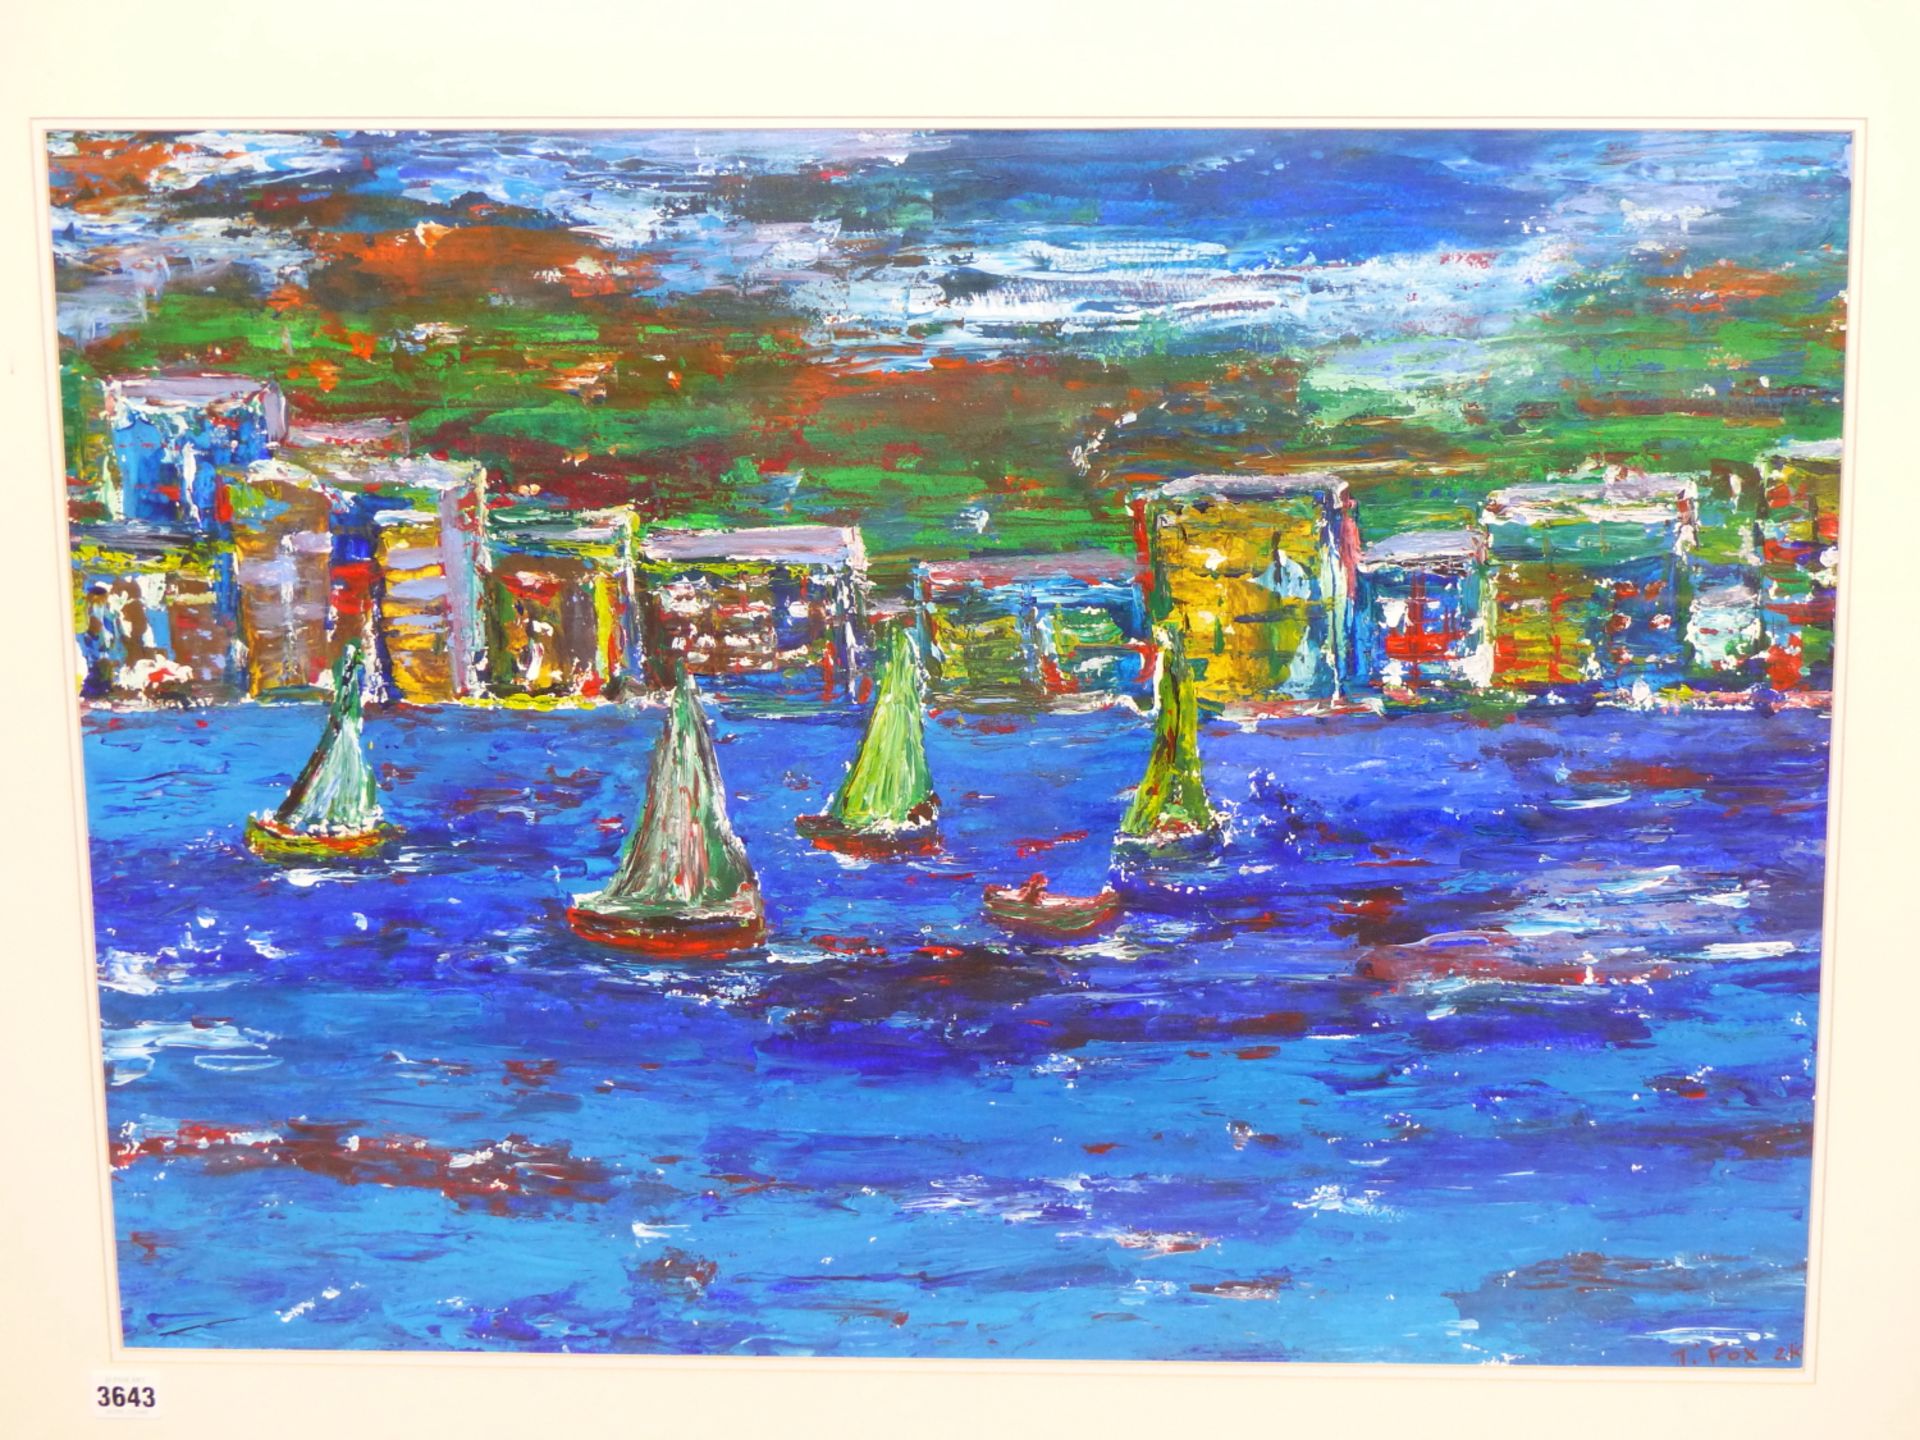 T FOX. (20TH/21ST CENTURY) ARR. BOATING BEFORE A COASTAL TOWN- ACRYLIC, SIGNED AND DATED LOWER RIGHT - Image 4 of 5